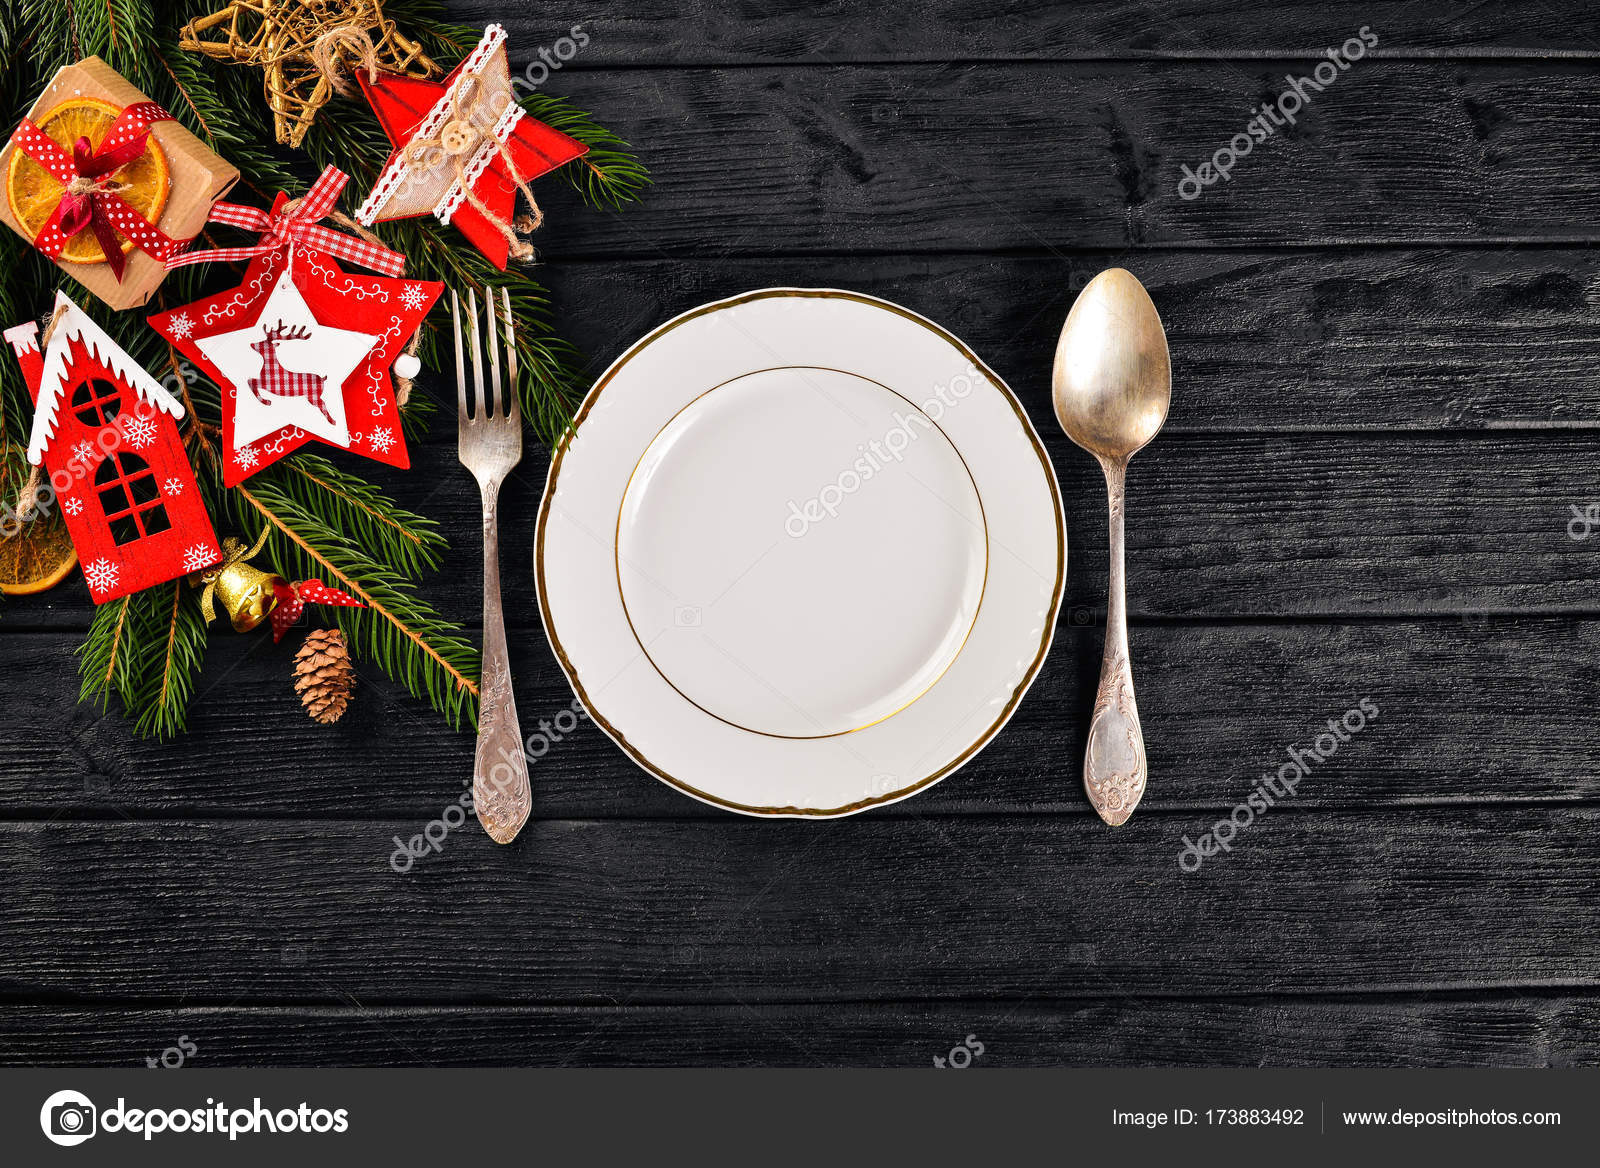 Christmas Table Decoration Christmas Dinner Plate Cutlery Decorated Festive Decorations Winter Holidays Christmas Card Free Space For Your Text Merry Christmas Happy New Year Stock Photo Image By C Yarunivphoto 173883492